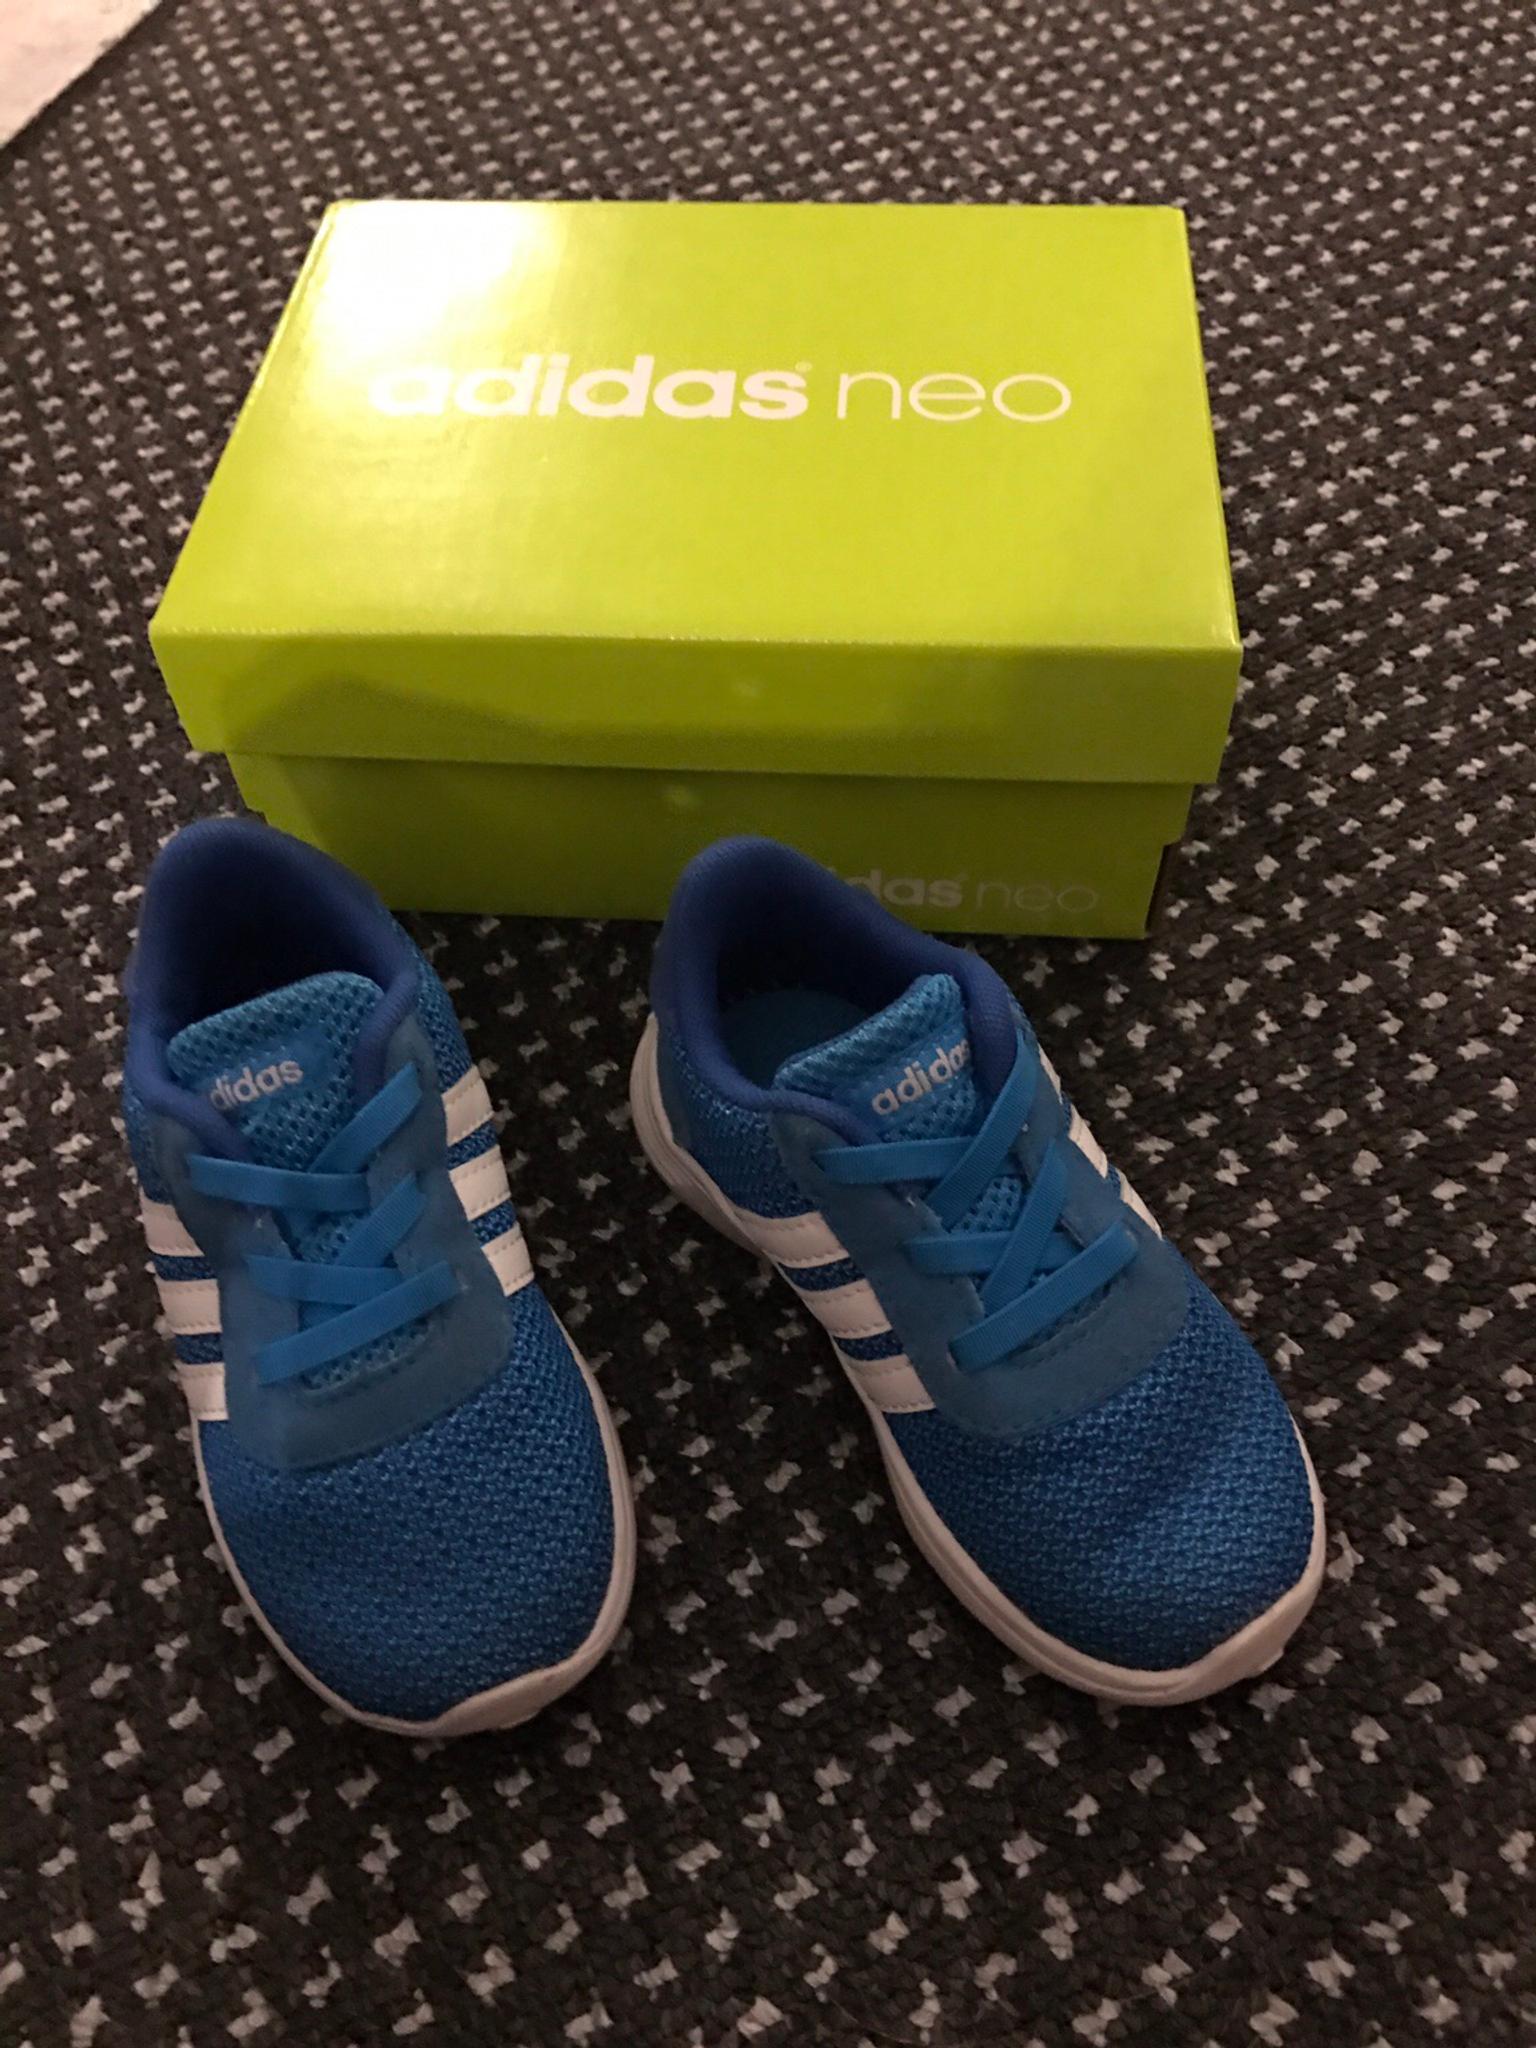 Adidas NEO Sneakers Gr. 24 in 4030 Linz for €6.00 for sale | Shpock